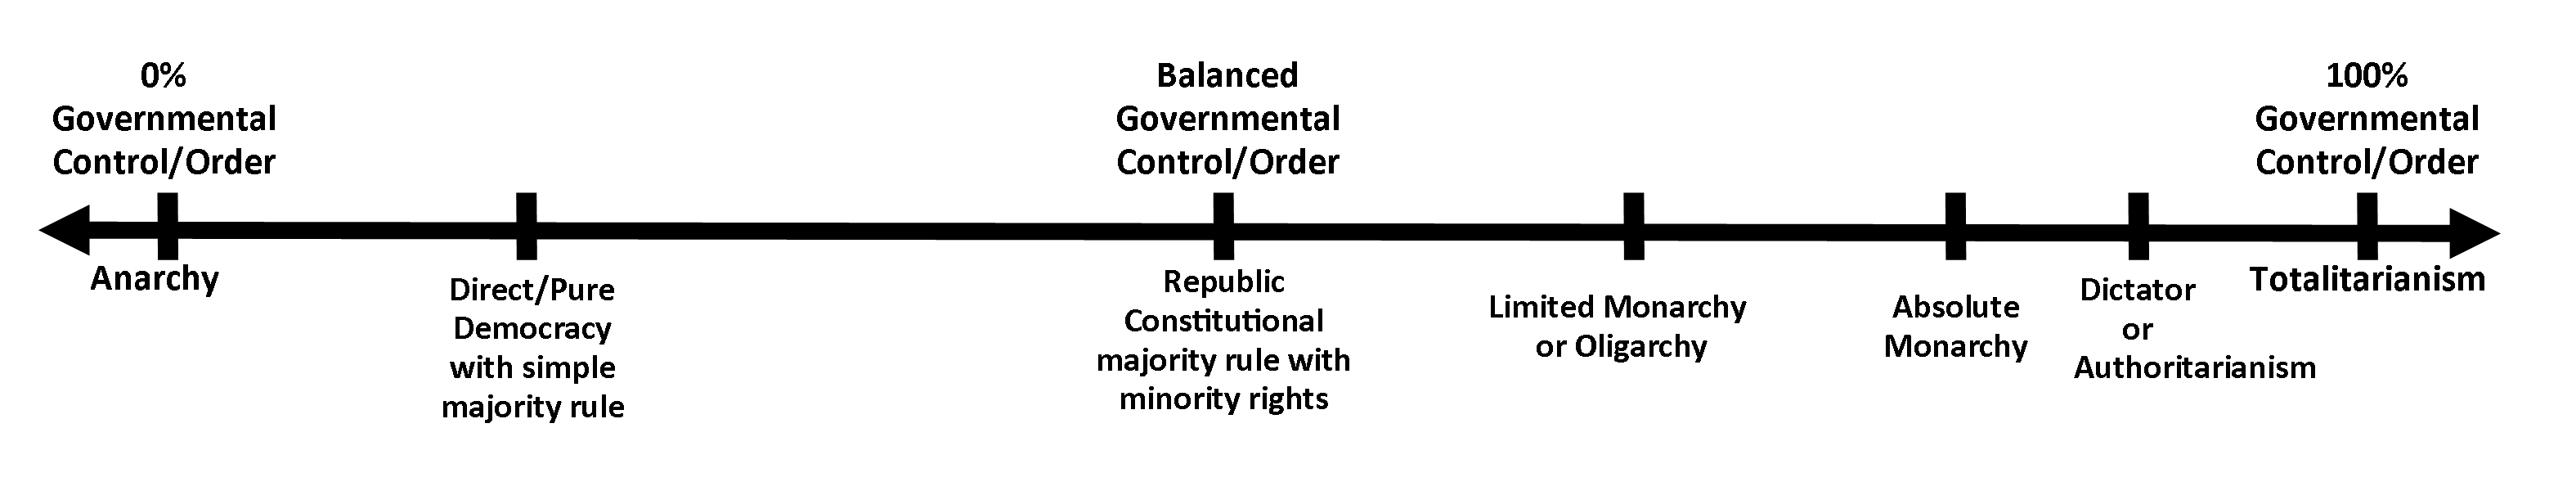 Arrow chart showing anarchy at 0% control to totalitarianism at 100% control.